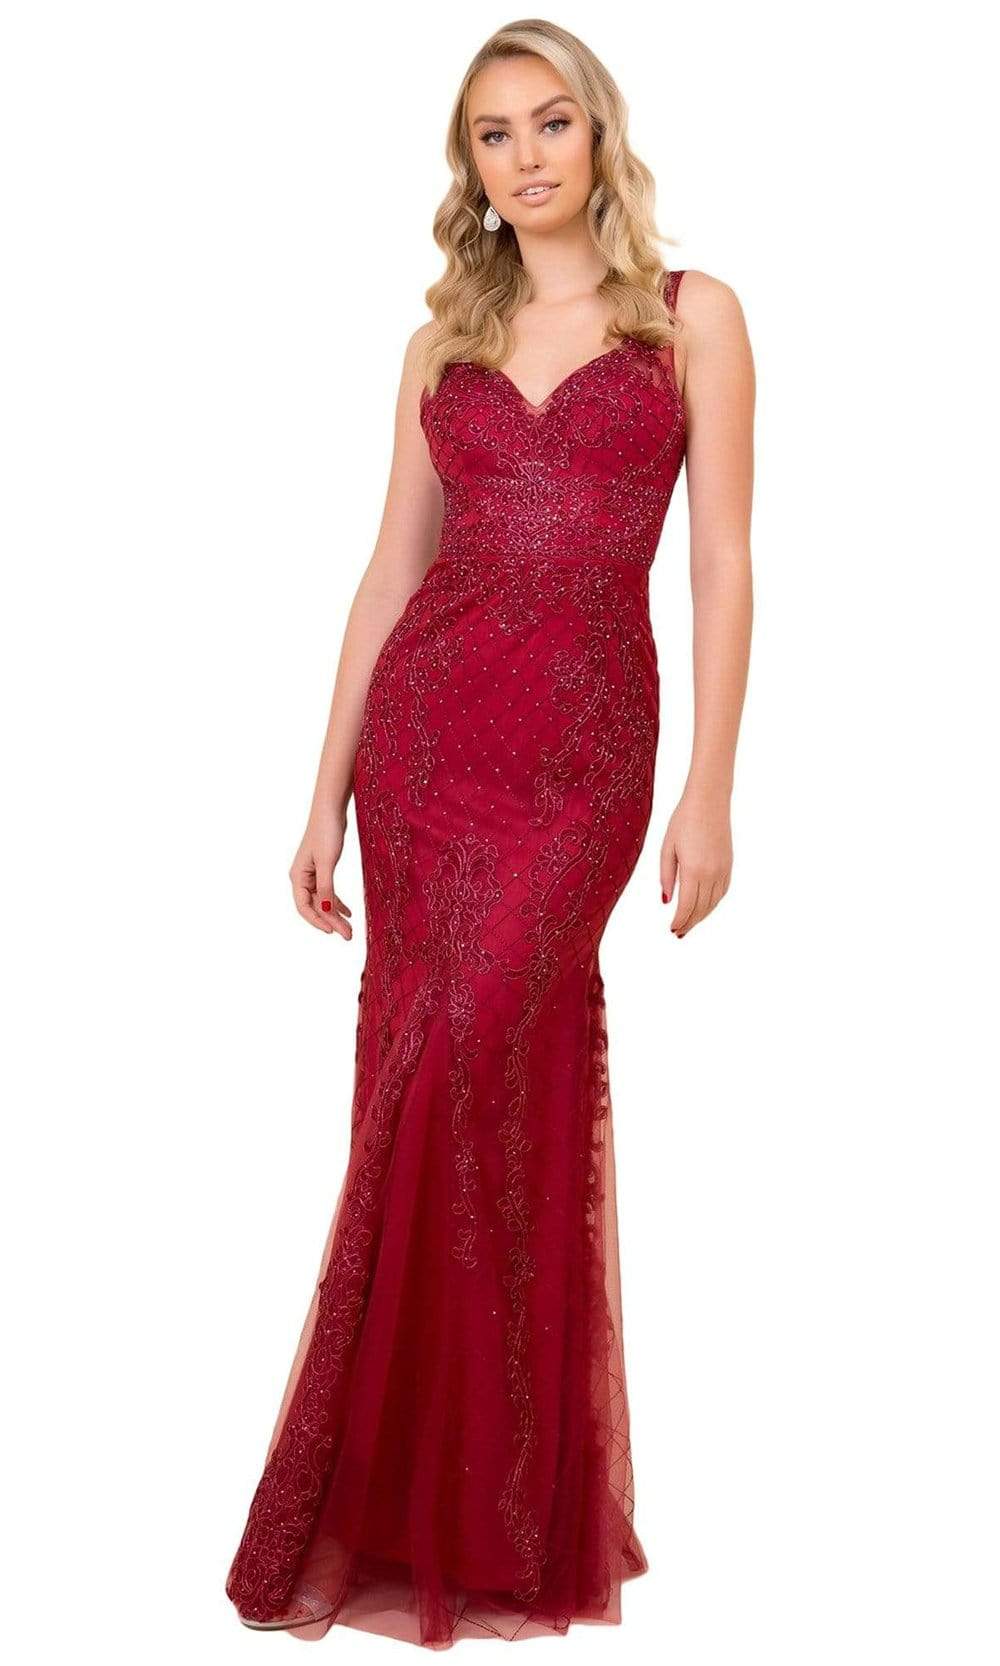 Image of Nox Anabel - A398 Sleeveless V Neck Beaded Lace Applique Trumpet Gown